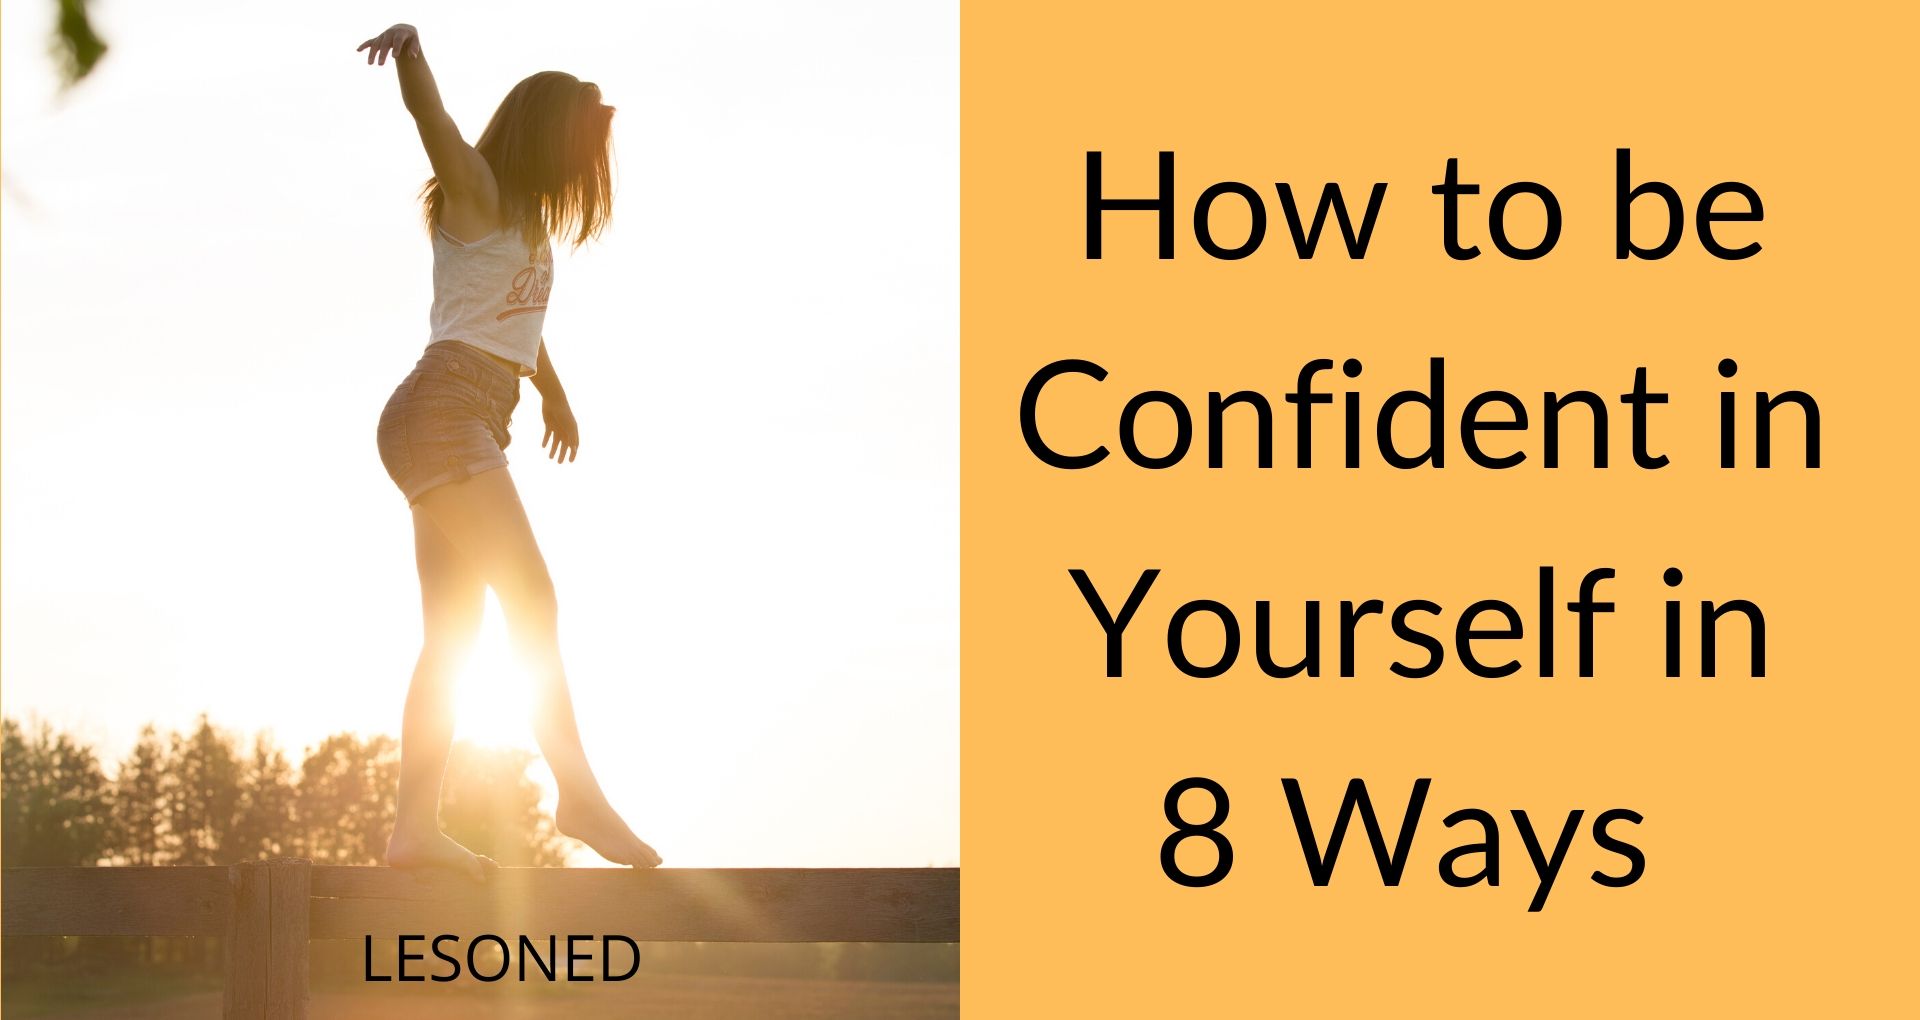 How to be Confident in Yourself in 8 Ways